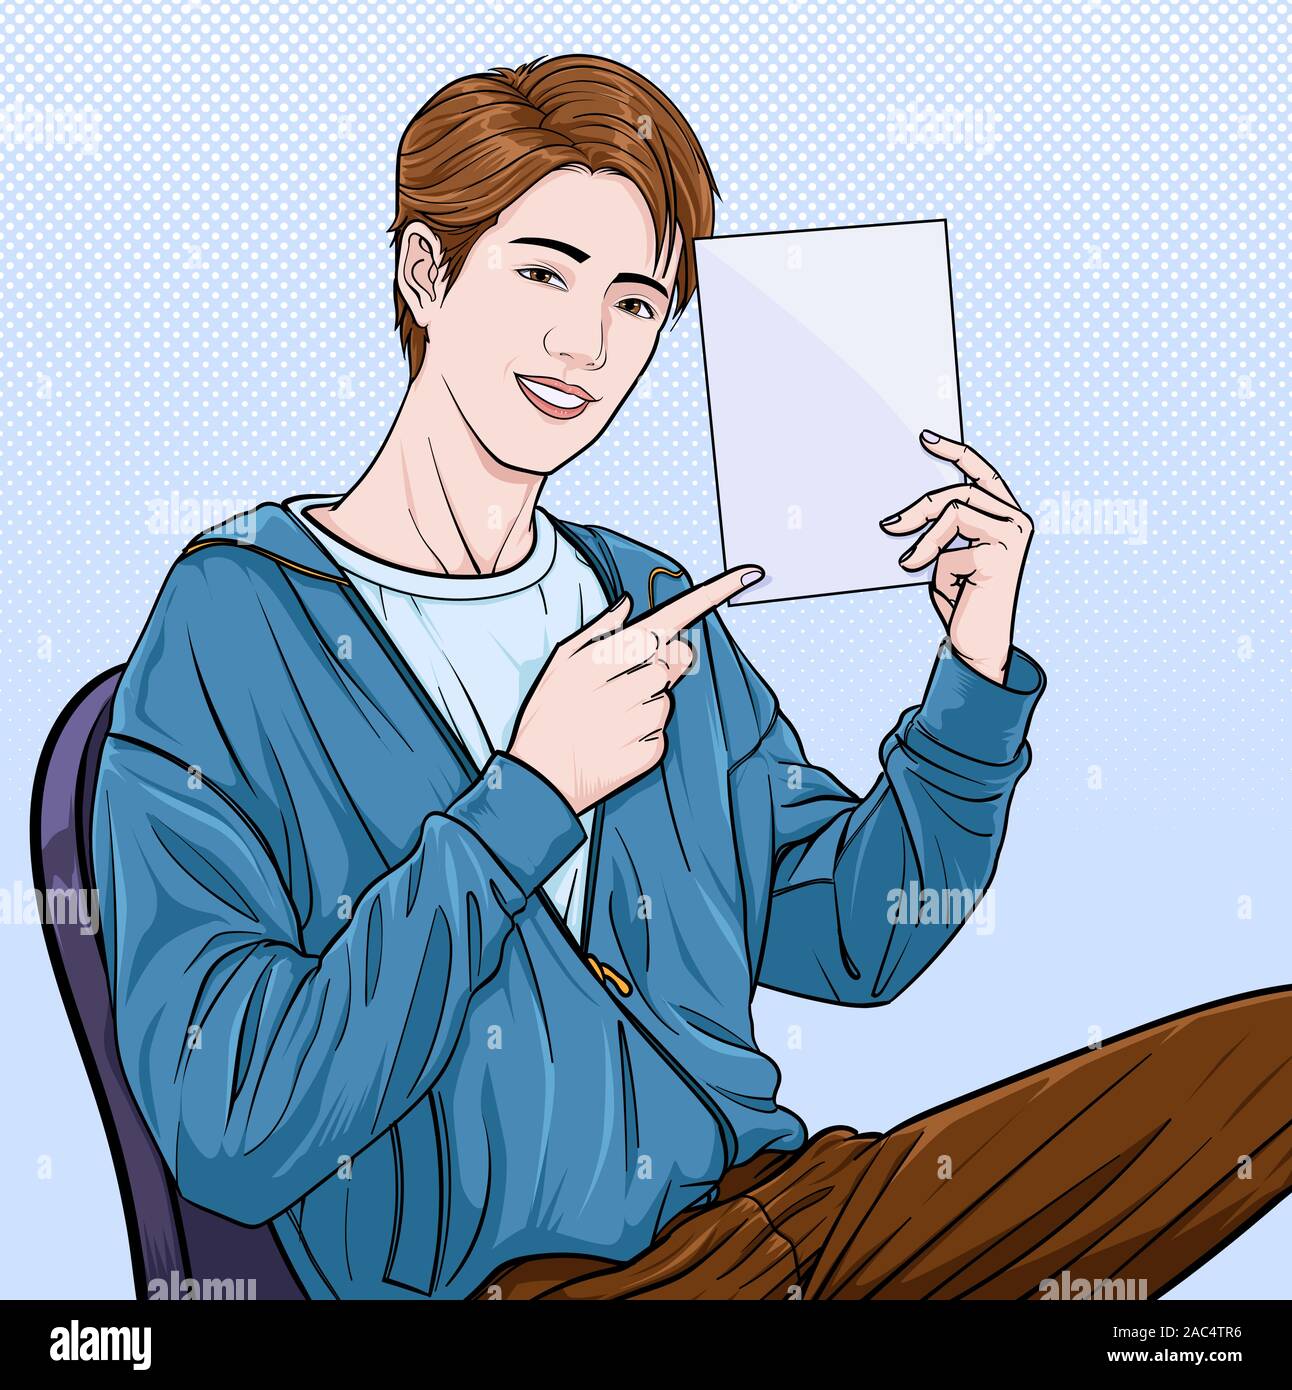 A man with paper in his hand Point to target Illustration vector On pop art comics style Abstract background Stock Vector